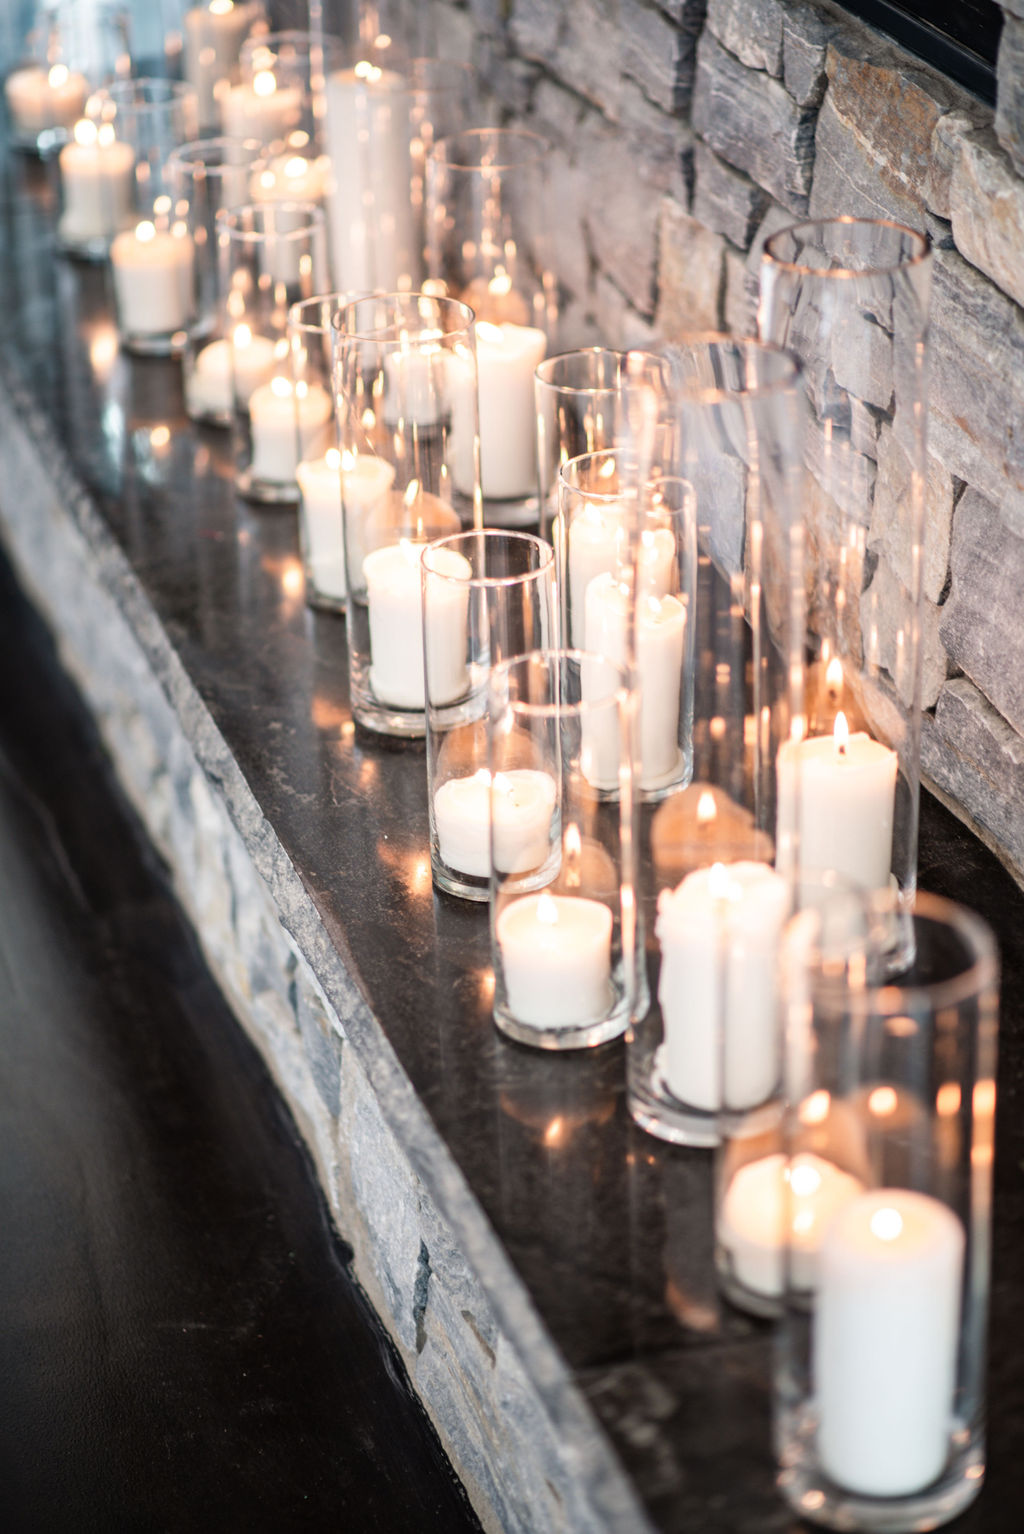 Long mantle of white candles in candle vases